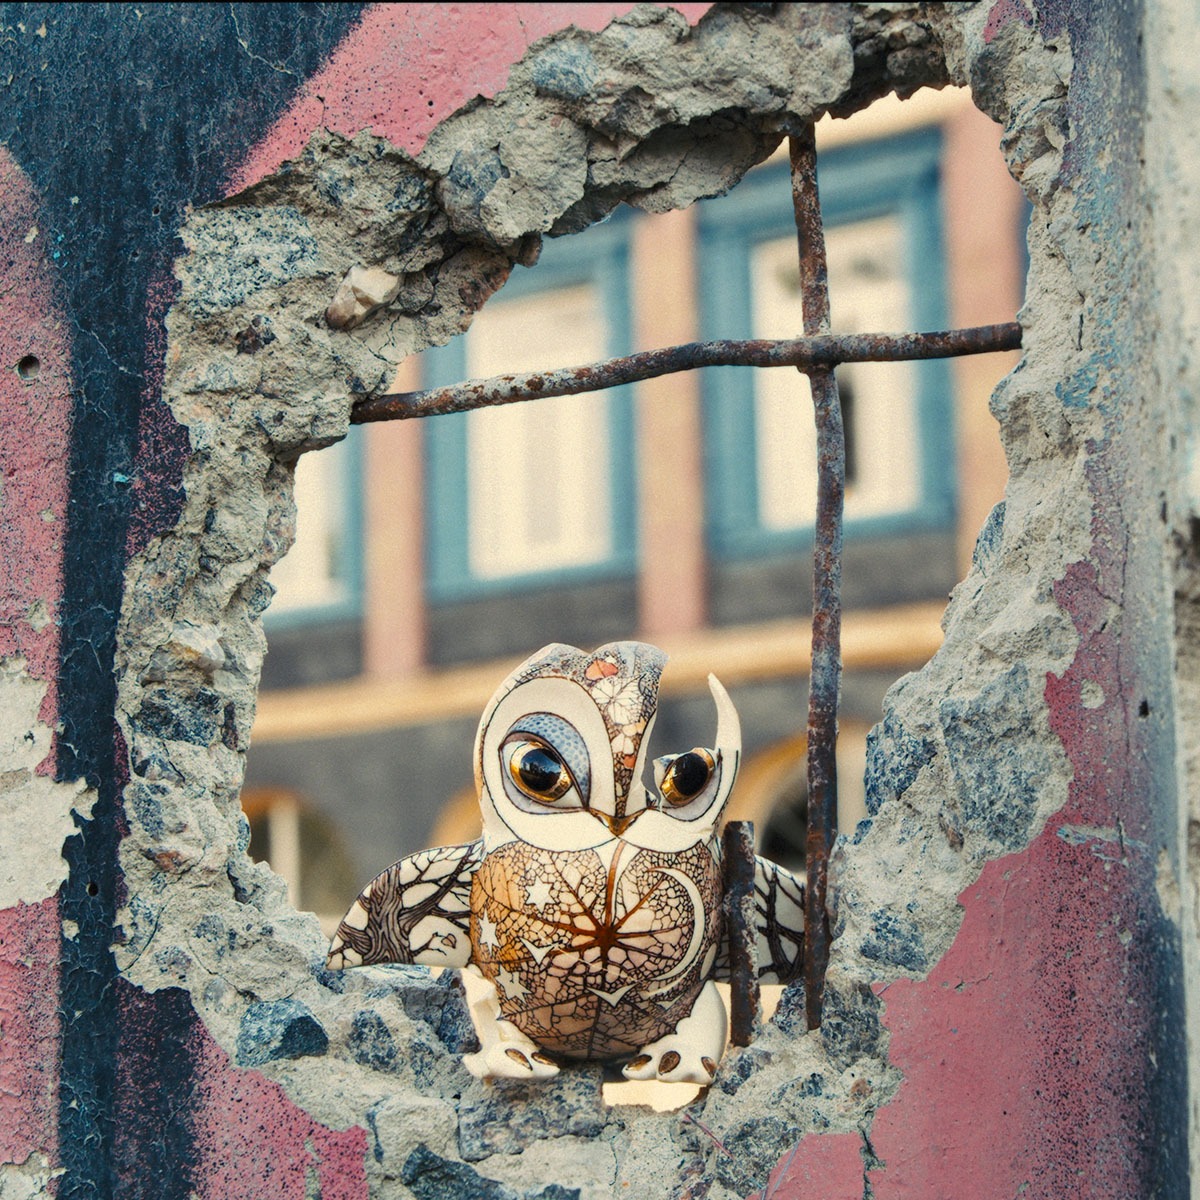 A porcelain owl peeking out of a hole in a wall.